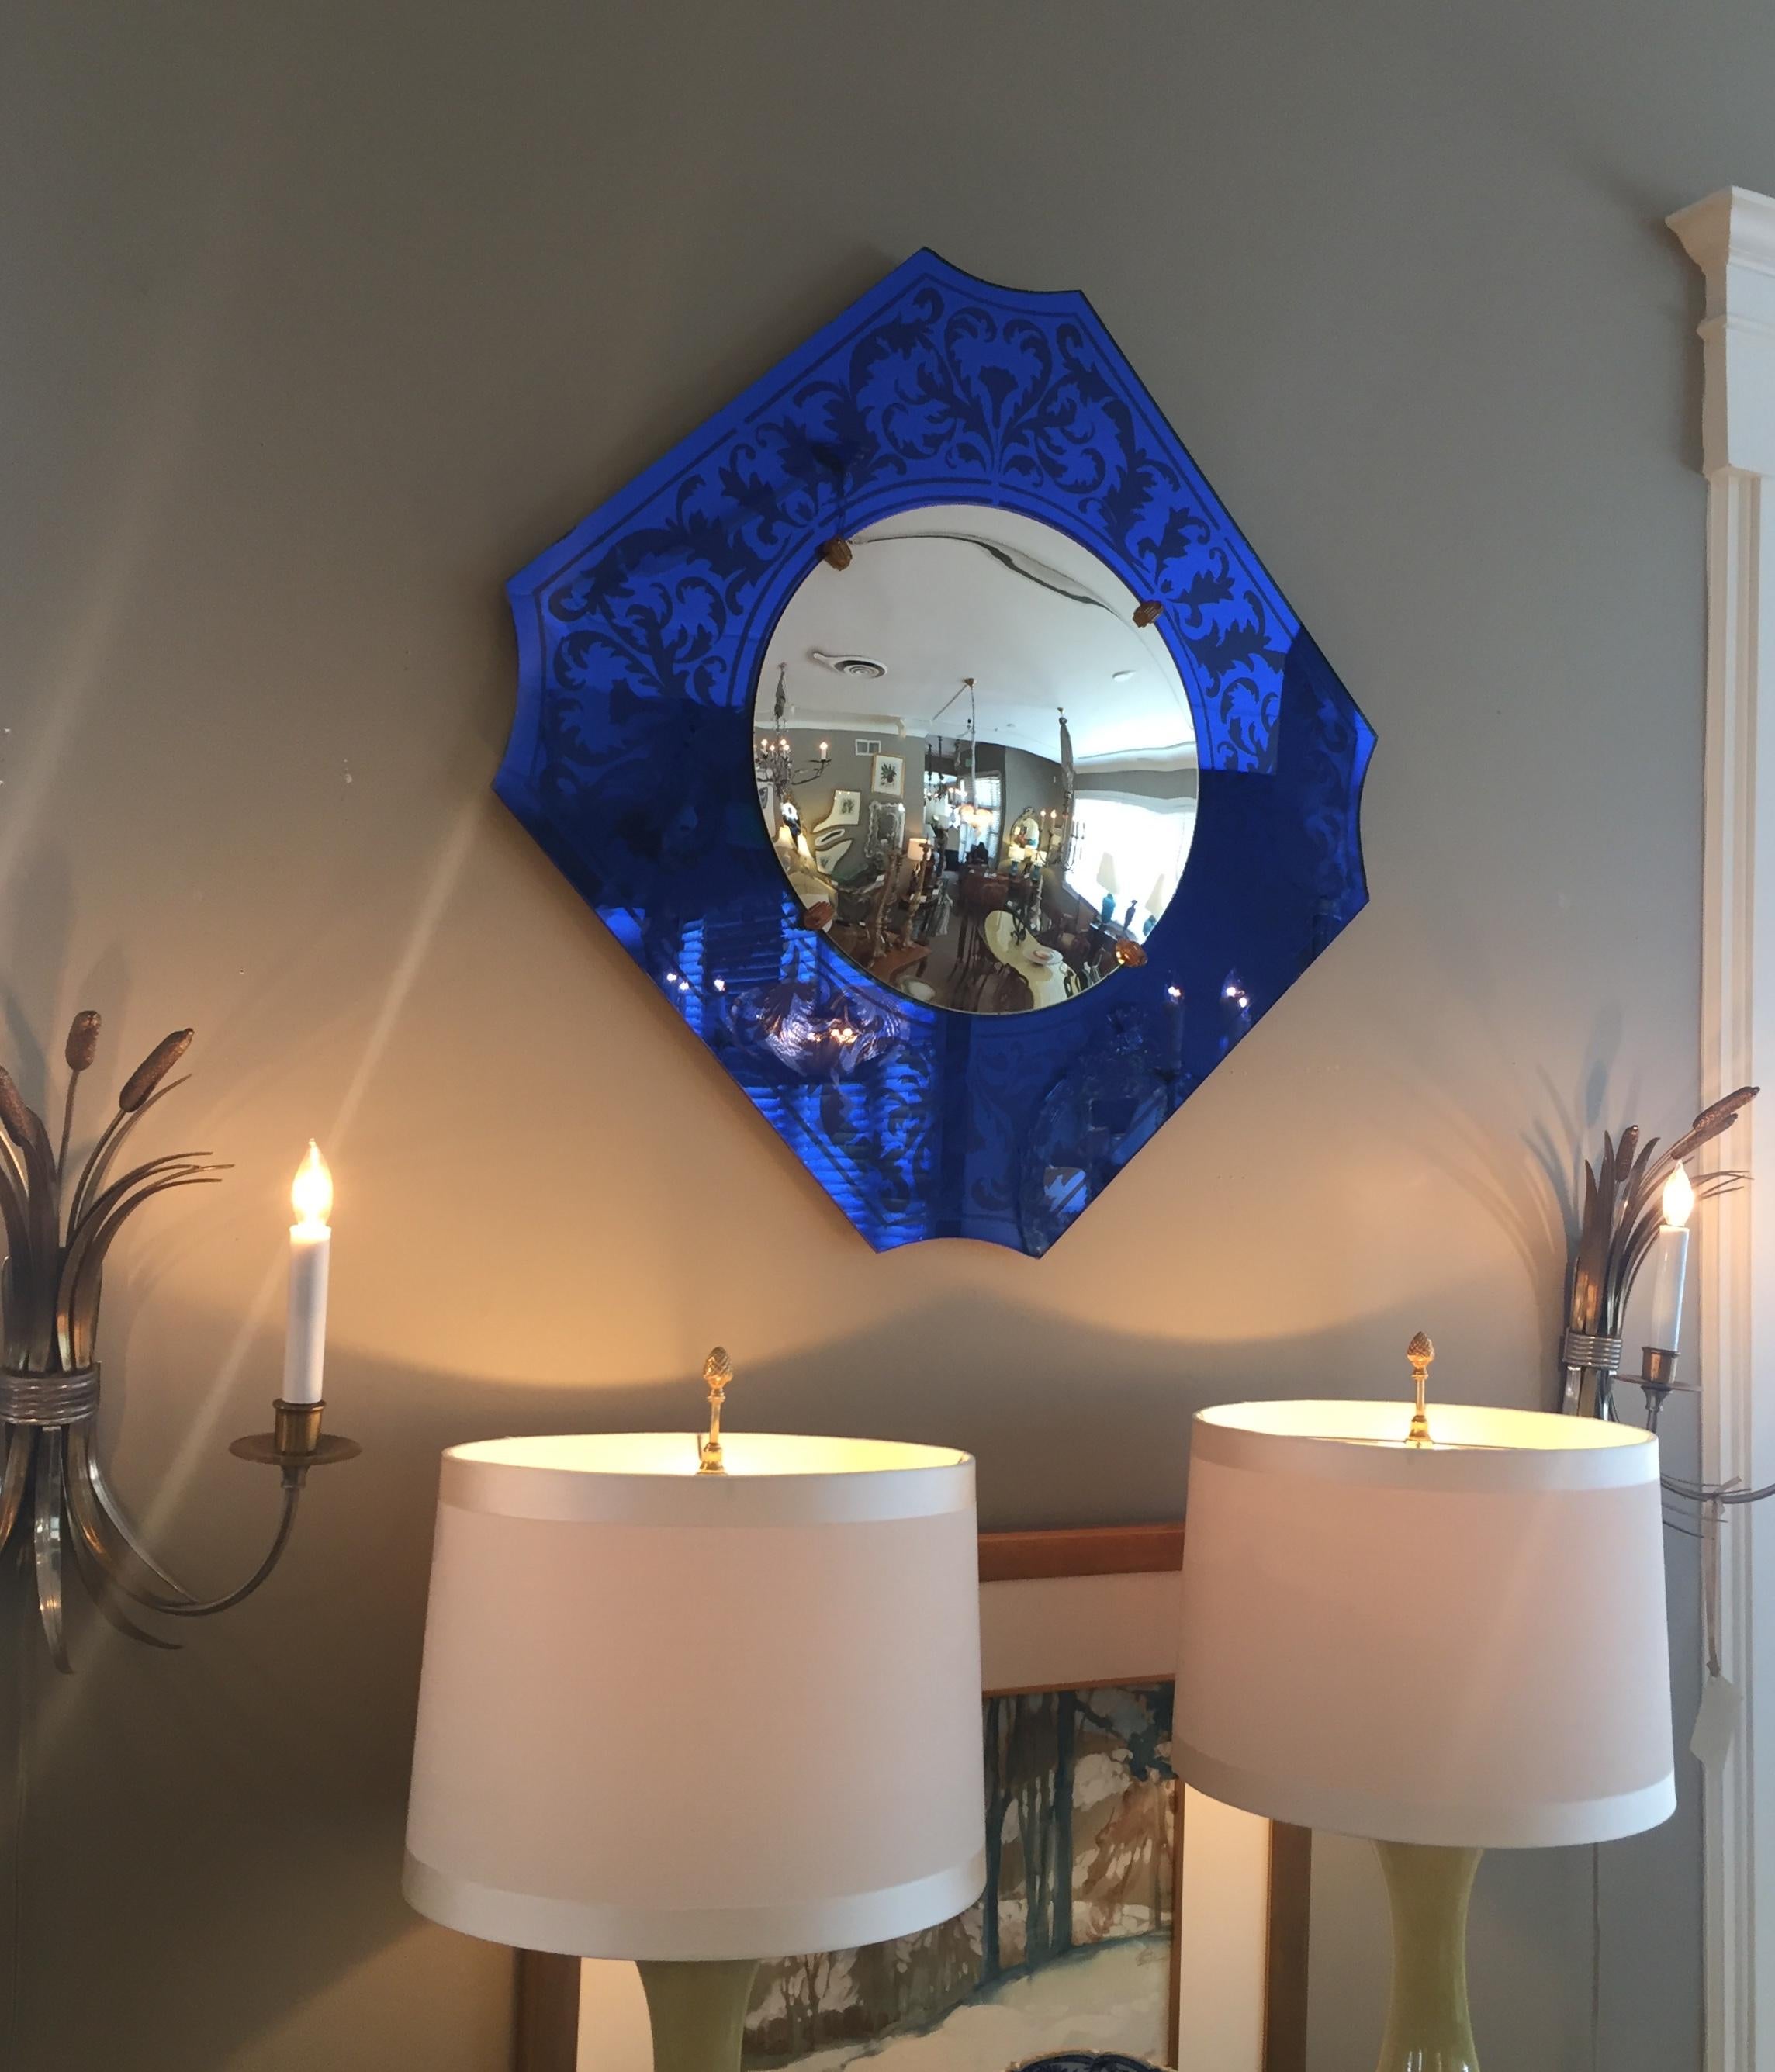 Mid-20th Century Stylish American Art Deco Bull's Eye Mirror with Etched Cobalt Blue Frame